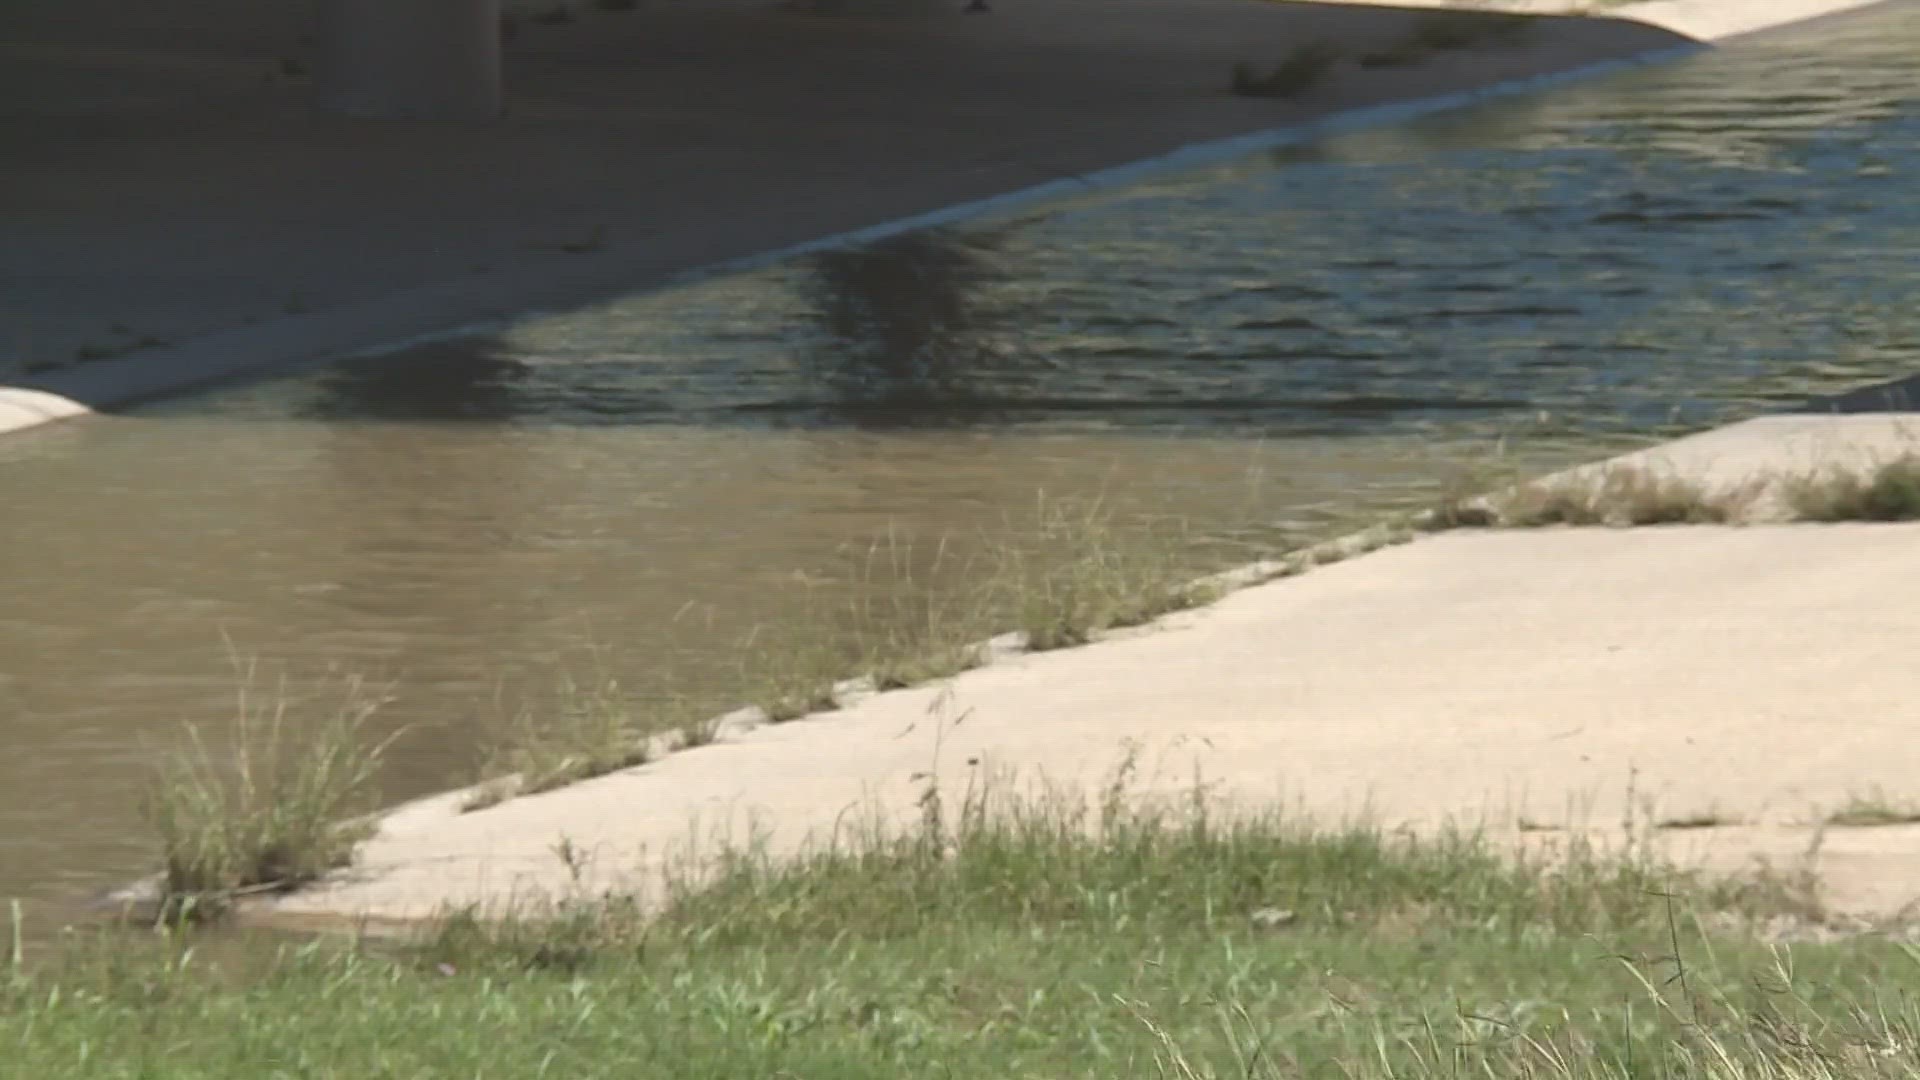 The San Antonio Fire Department was able to pull the body from the swift moving water.